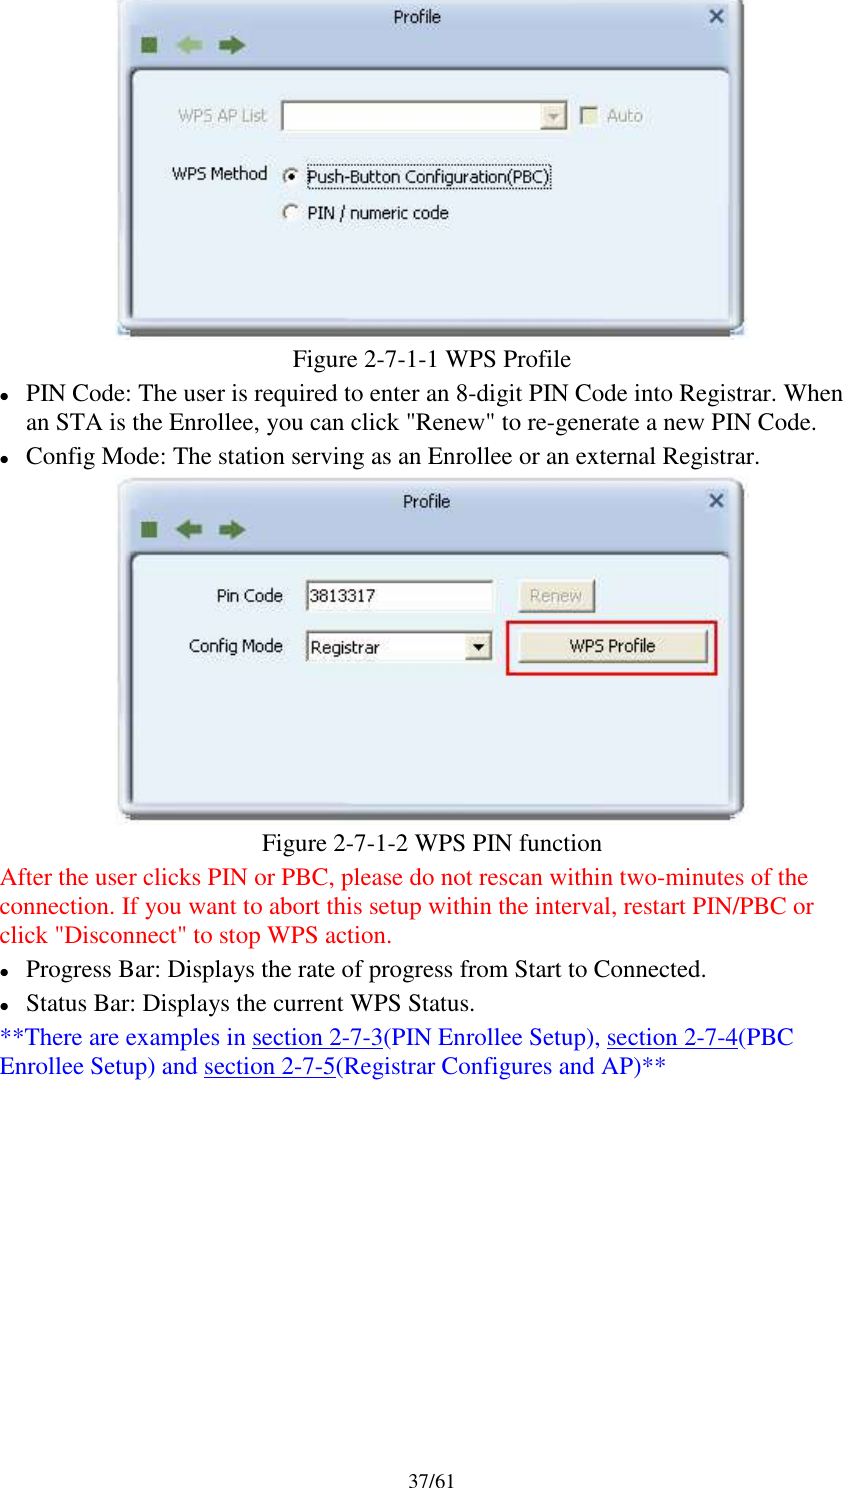 37/61Figure 2-7-1-1 WPS ProfilePIN Code: The user is required to enter an 8-digit PIN Code into Registrar. Whenan STA is the Enrollee, you can click &quot;Renew&quot; to re-generate a new PIN Code.Config Mode: The station serving as an Enrollee or an external Registrar.Figure 2-7-1-2 WPS PIN functionAfter the user clicks PIN or PBC, please do not rescan within two-minutes of theconnection. If you want to abort this setup within the interval, restart PIN/PBC orclick &quot;Disconnect&quot; to stop WPS action.Progress Bar: Displays the rate of progress from Start to Connected.Status Bar: Displays the current WPS Status.**There are examples in section 2-7-3(PIN Enrollee Setup), section 2-7-4(PBCEnrollee Setup) and section 2-7-5(Registrar Configures and AP)**